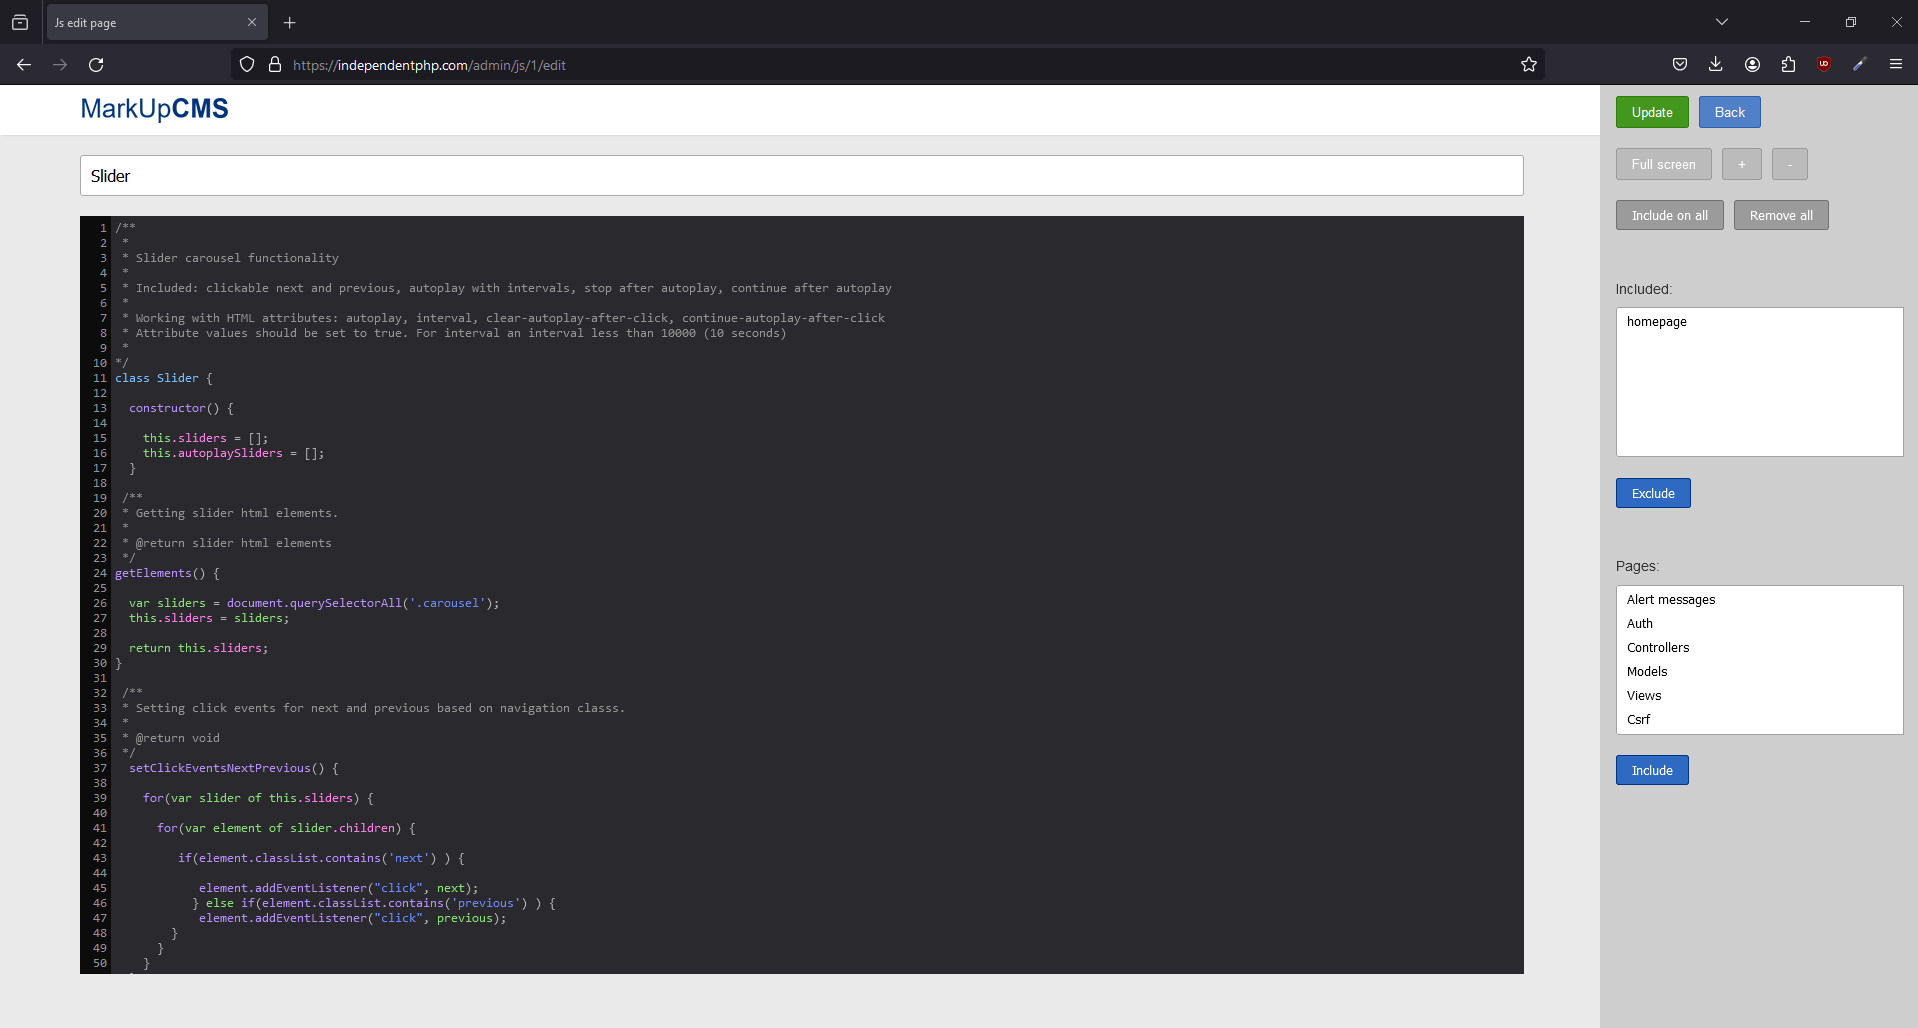 A screenshot of the js edit page in MarkUpCMS